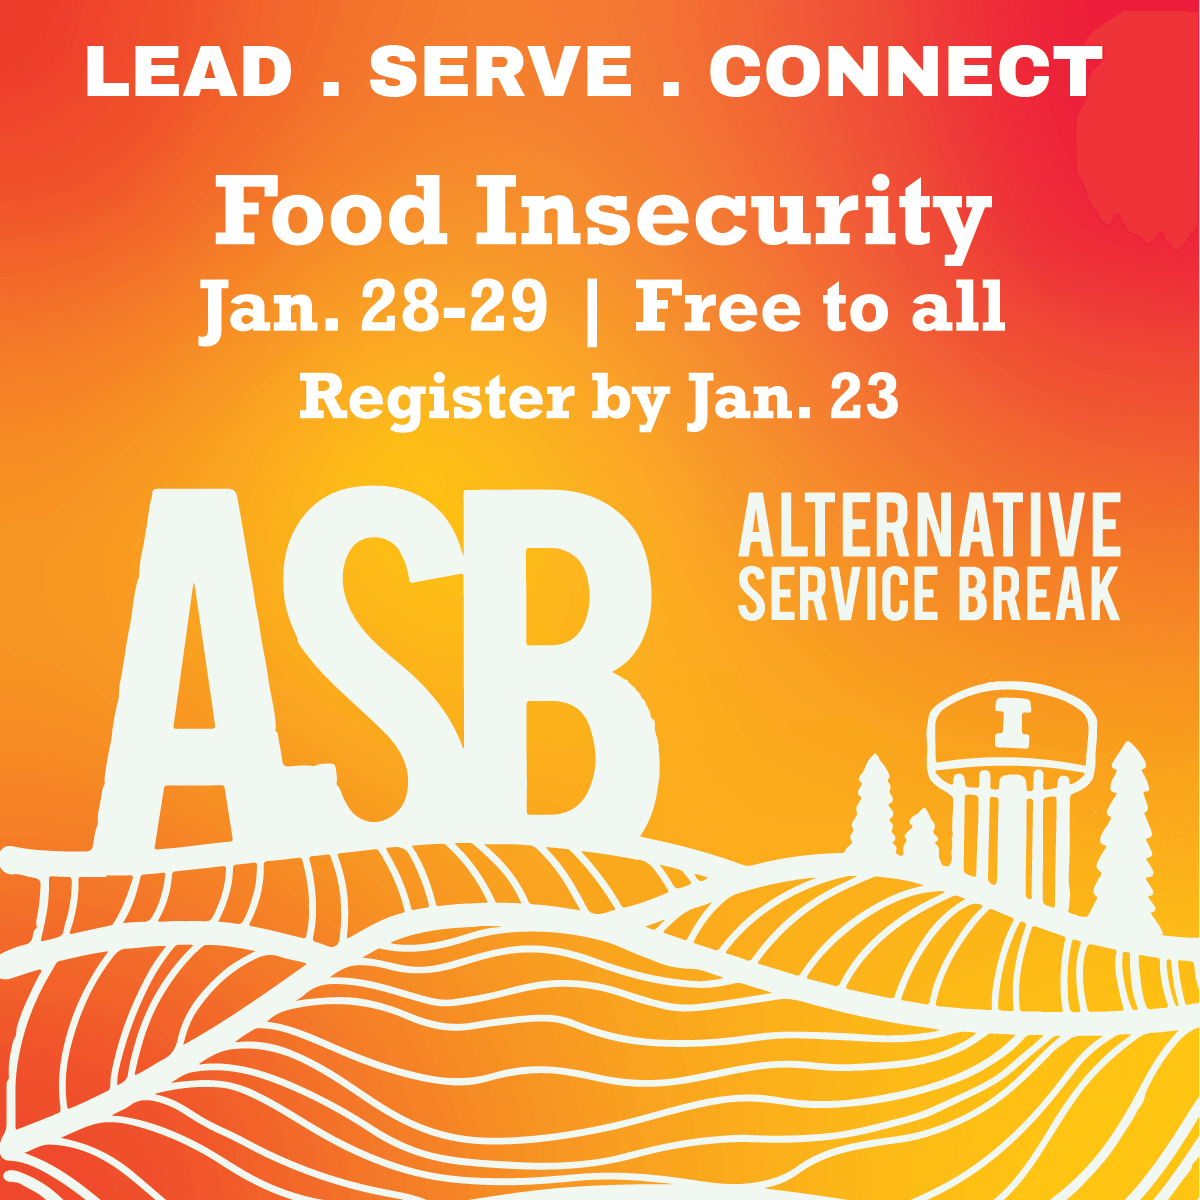 Join ASB on a Food Insecurity Weekend Trip in Jan. 2022.